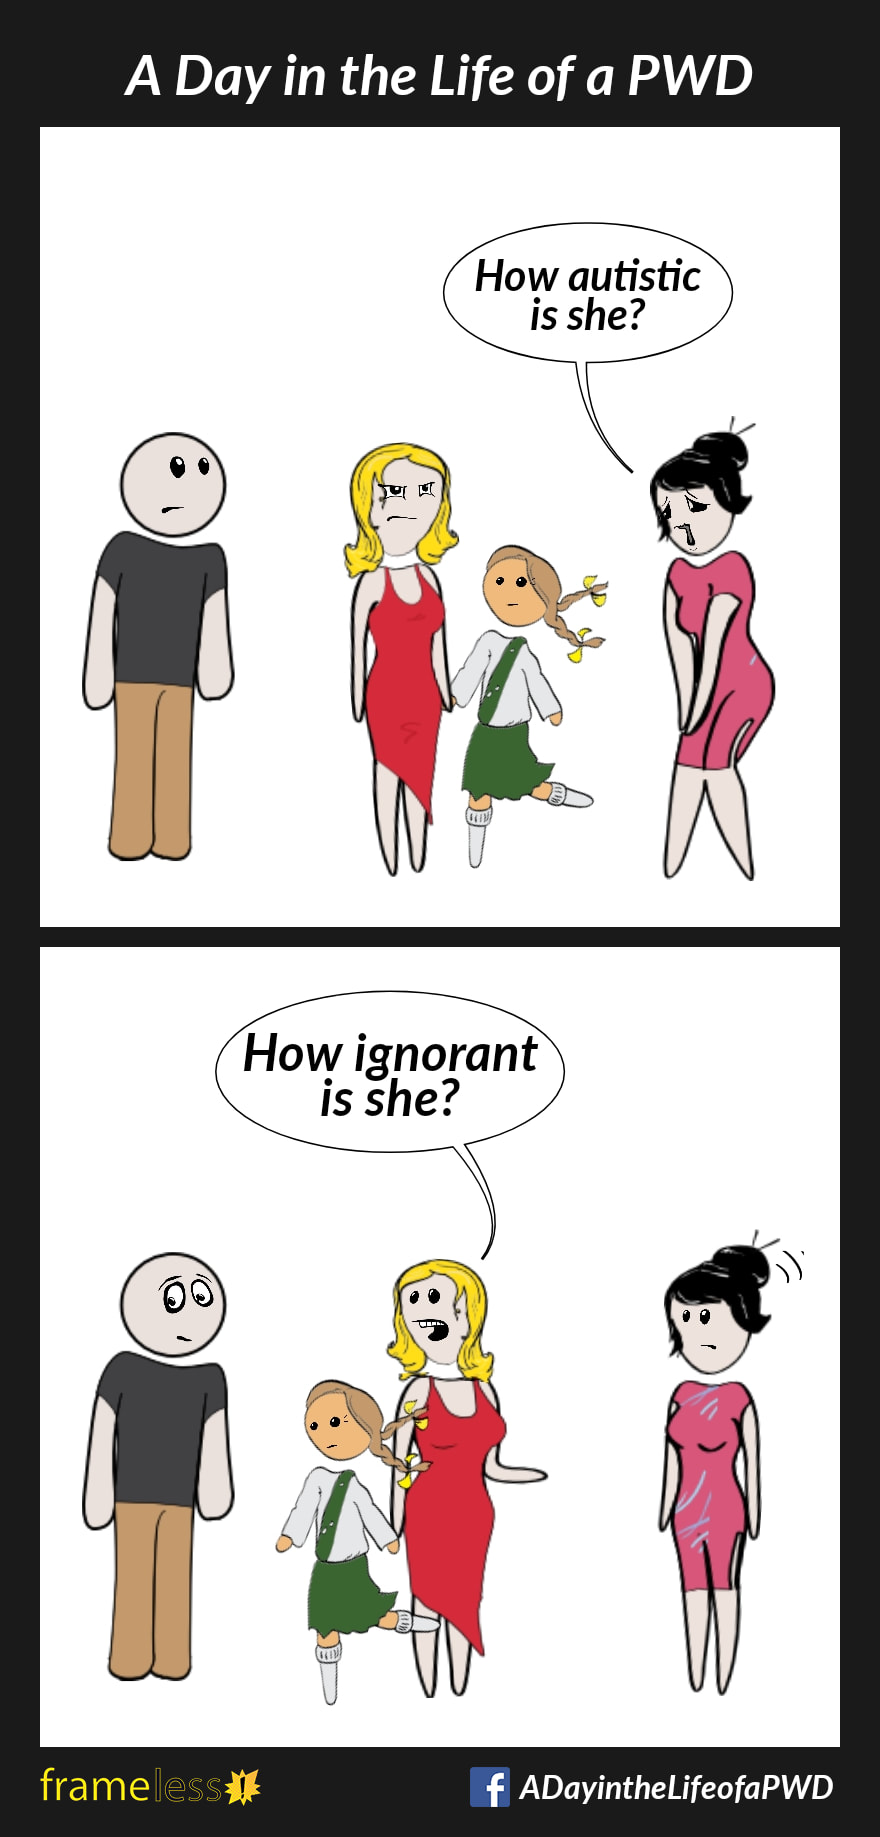 COMIC STRIP 
A Day in the Life of a PWD (Person With a Disability) 

Frame 1:
A mother with her Autistic daughter is chatting with a man and a woman.
WOMAN (sympathetically): How autistic is she?

Frame 2:
MOTHER (to man): How ignorant is she? (gesturing to woman)